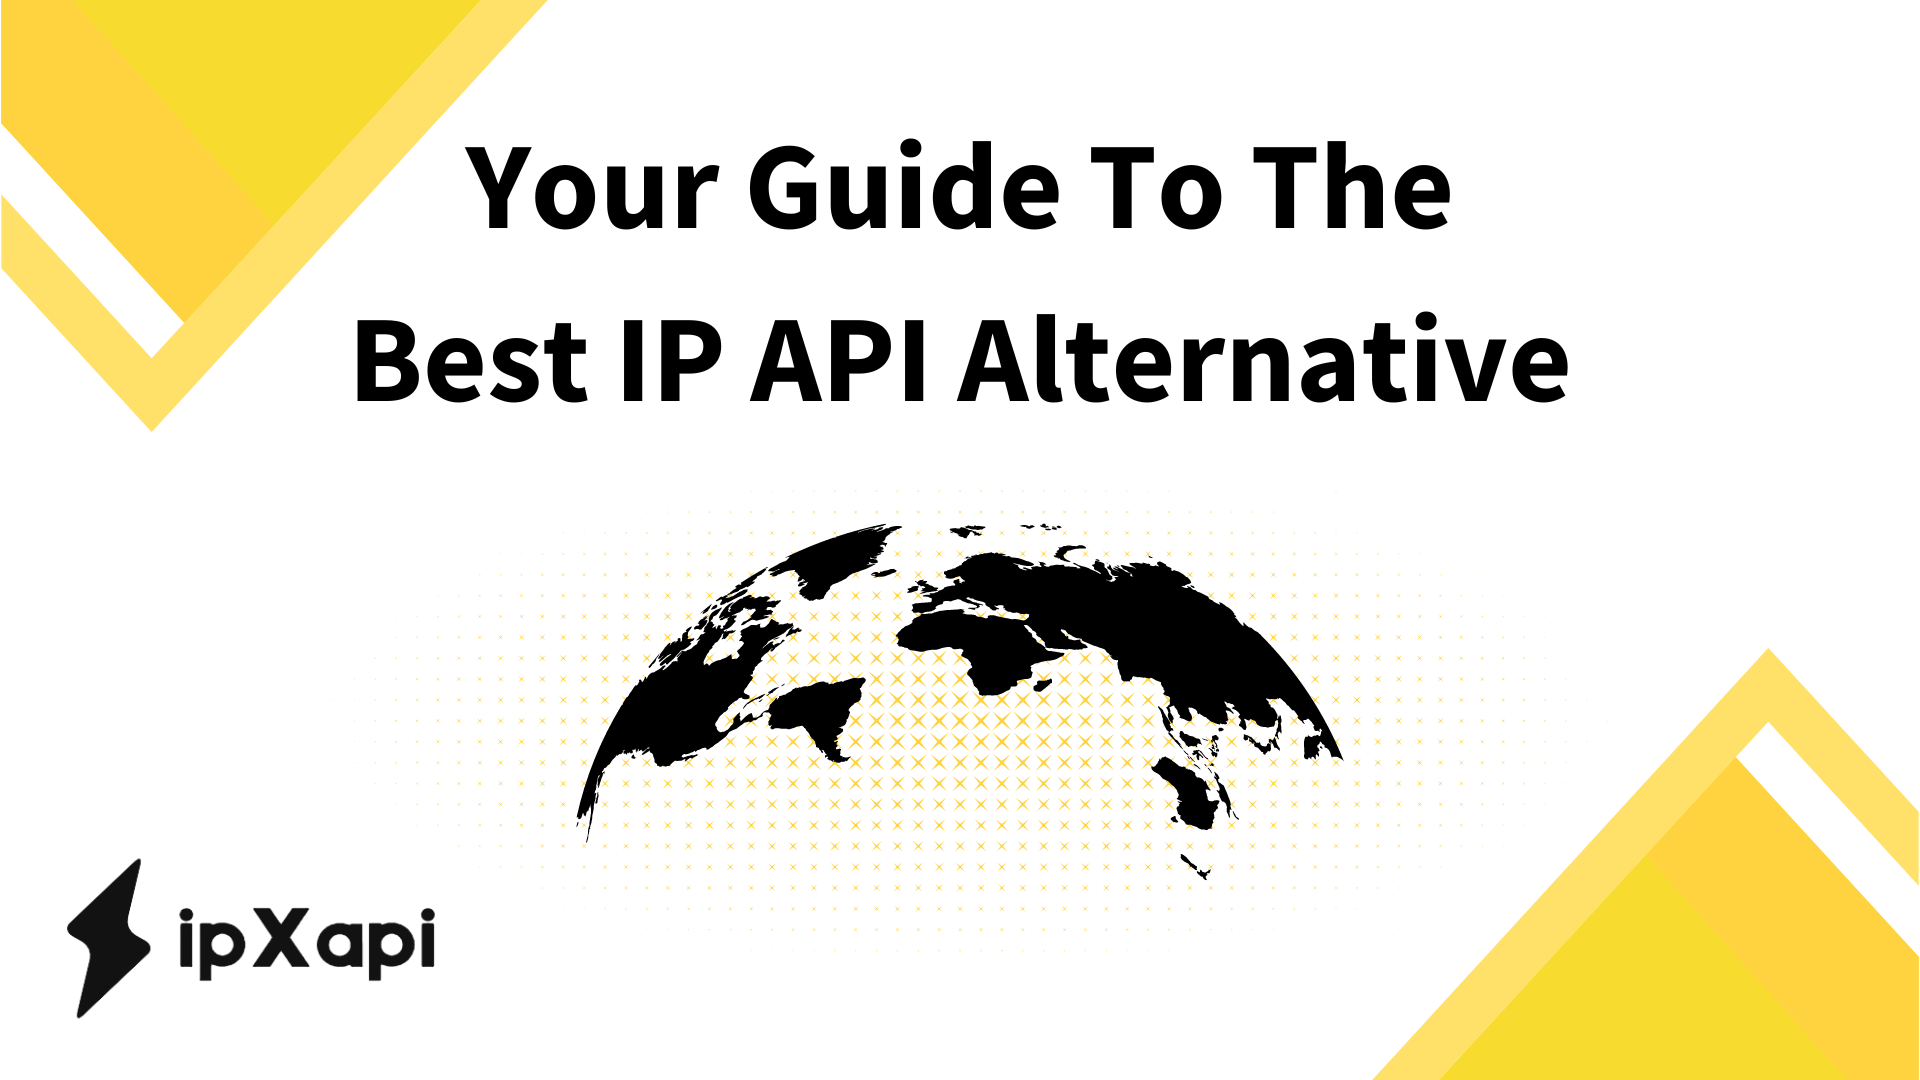 Your Guide To The Best IP API Alternative